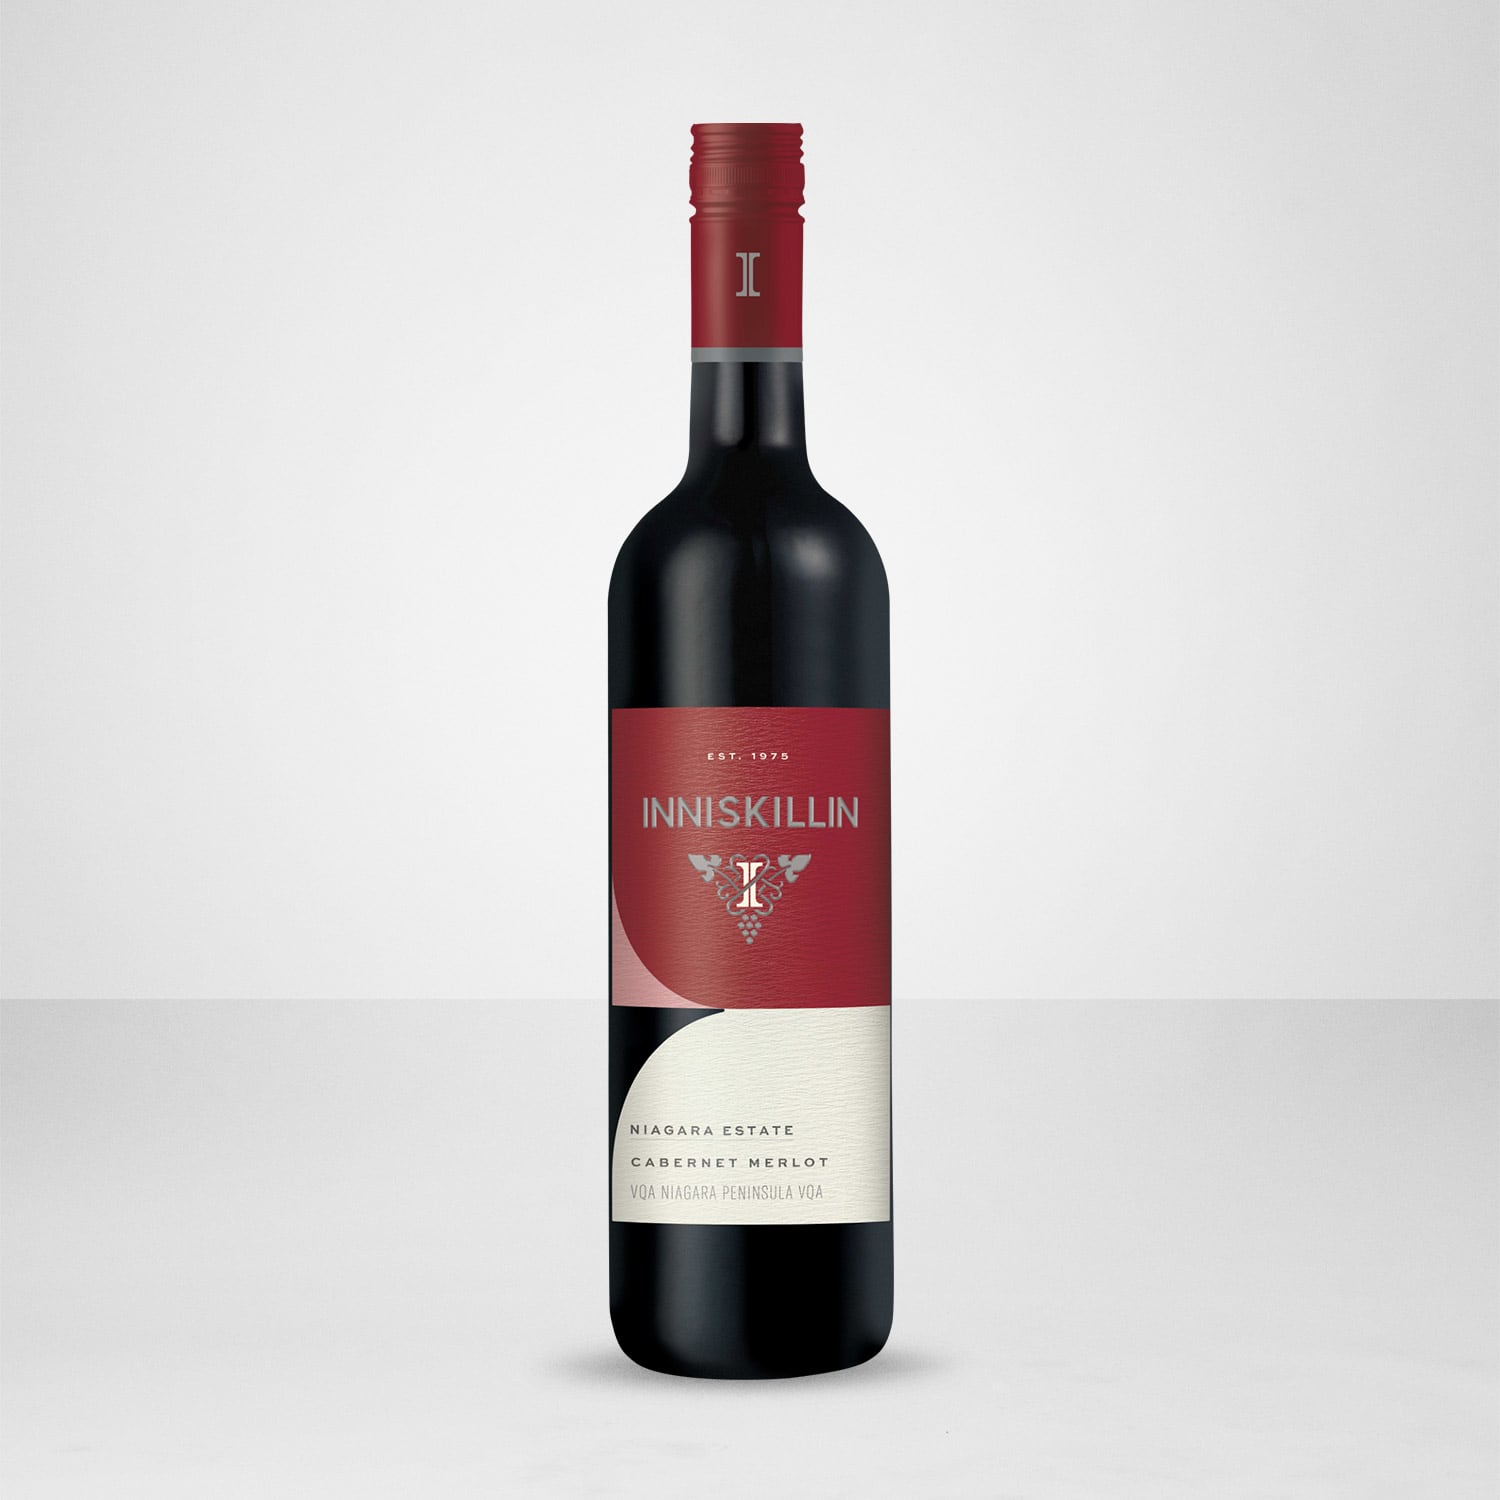 Great Estates of Niagara - Products - Inniskillin Discovery Series  East-West Merlot-Cabernet